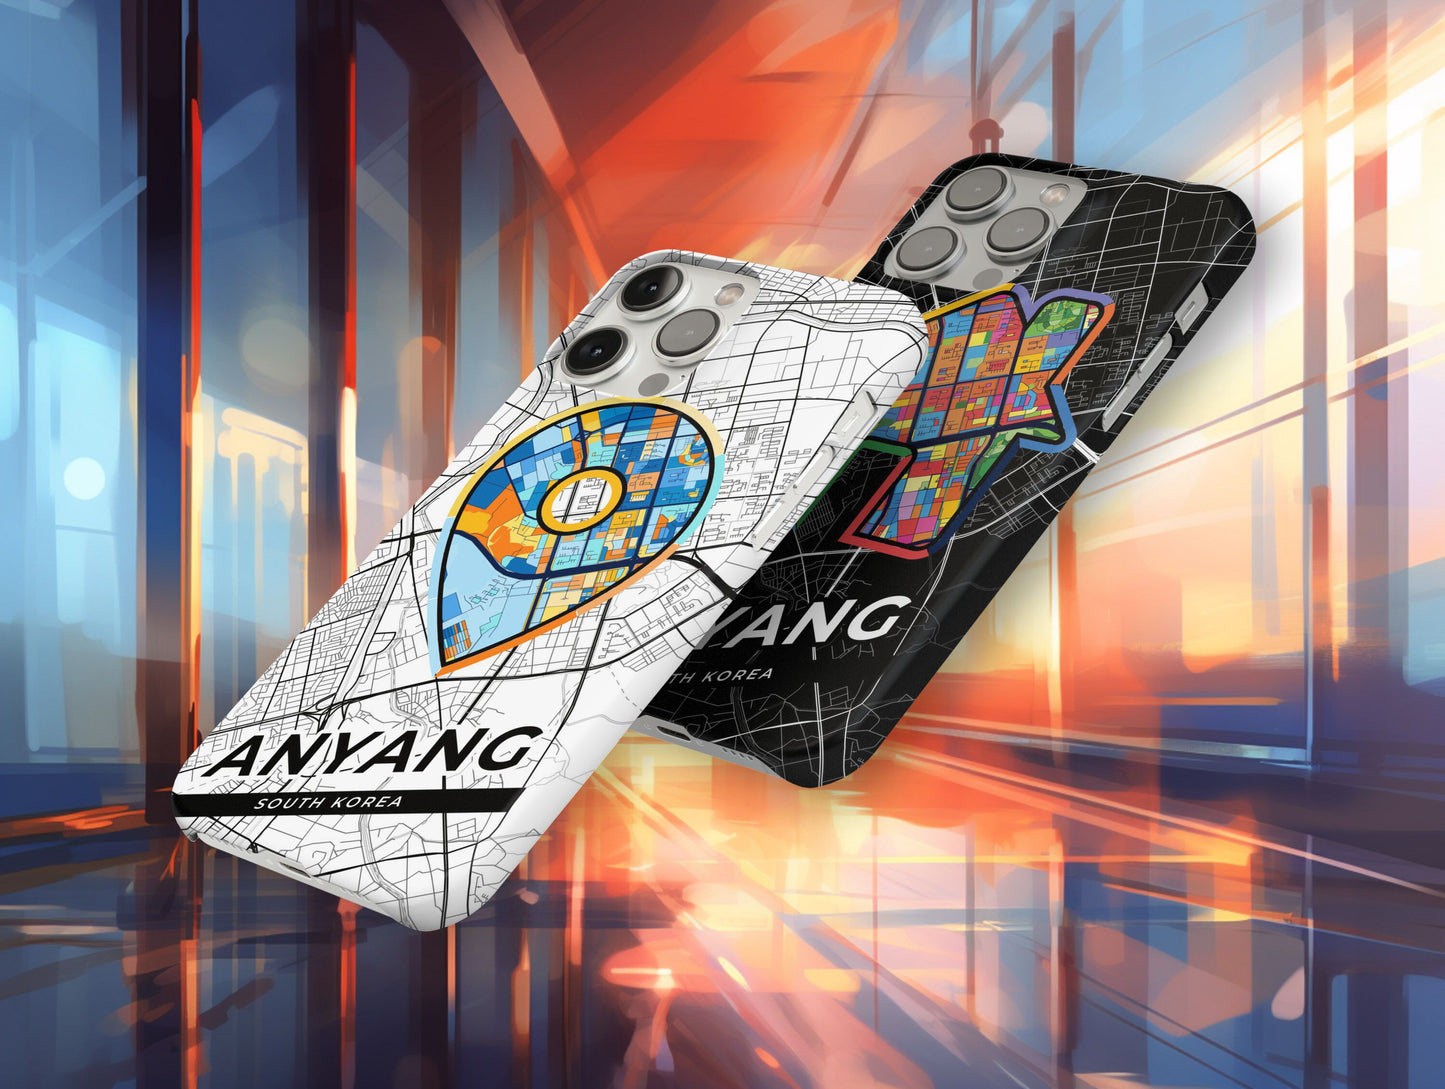 Anyang South Korea slim phone case with colorful icon. Birthday, wedding or housewarming gift. Couple match cases.